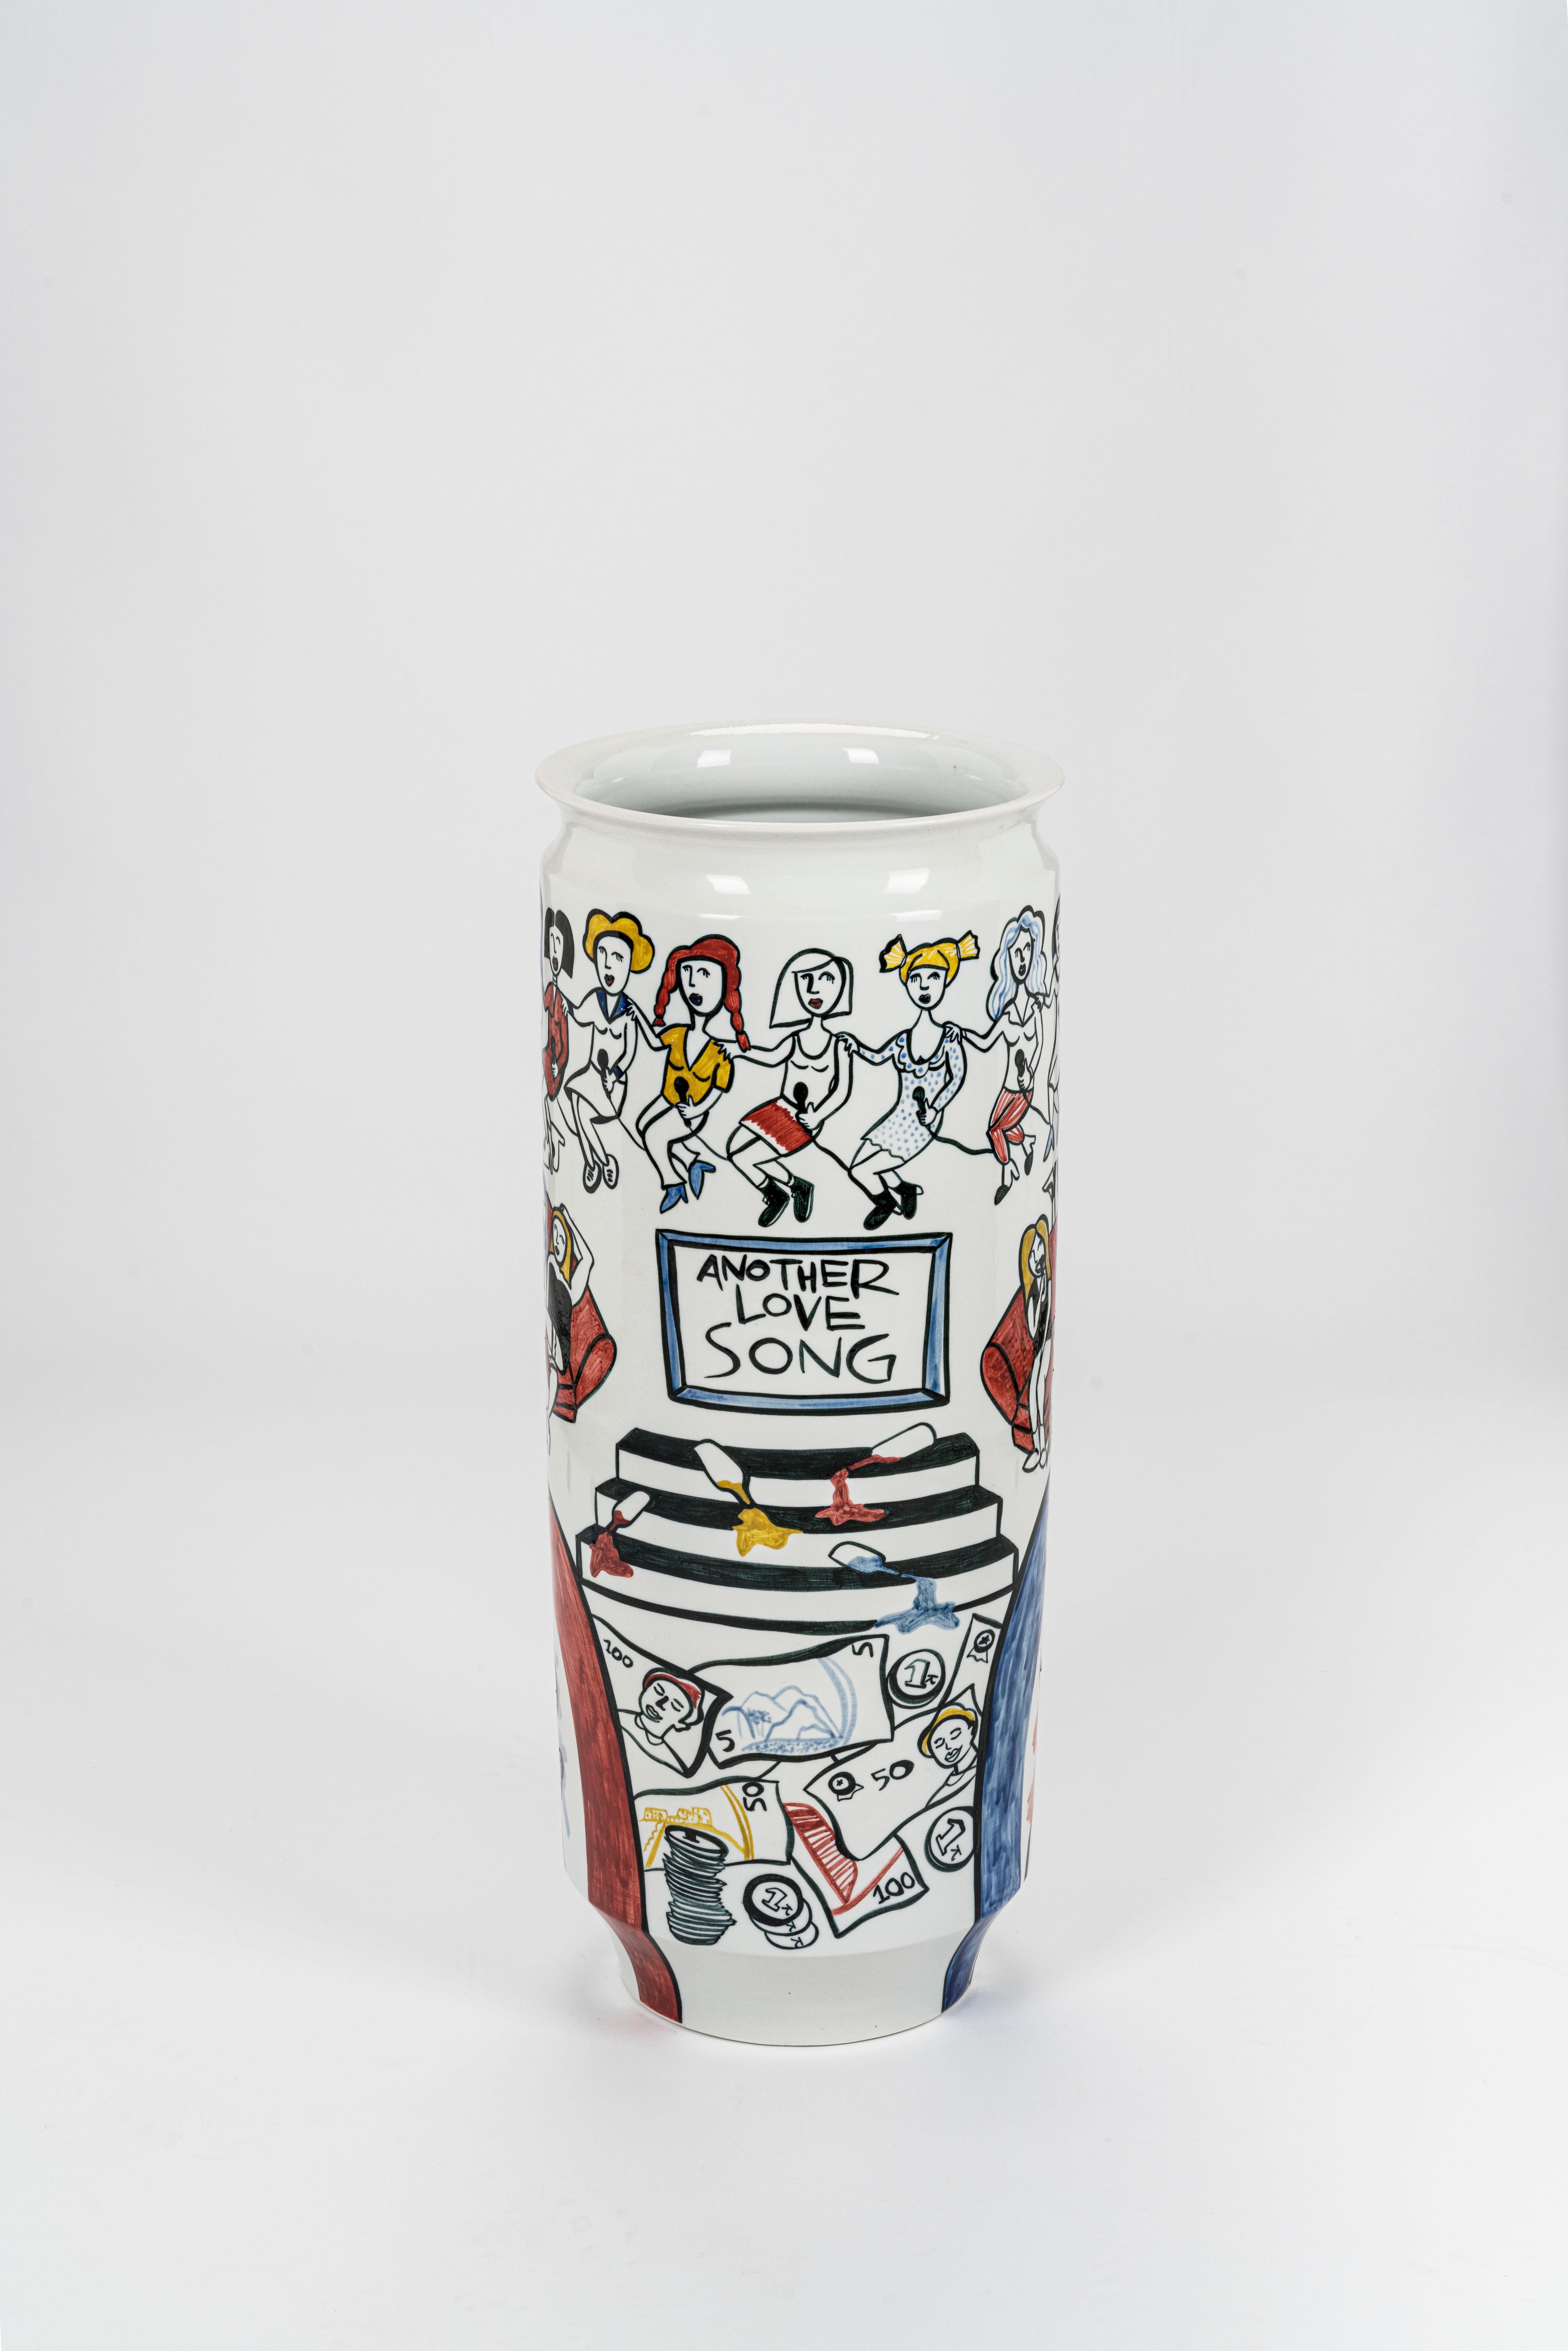 Luce Raggi, Karaoke (another love song), 2017 glazed porcelain 70 x 25 cm 
Hand painted vase with typical female evening scenes of karaoke mania. Women who forget their sentimental dramas by abandoning their heels and their repetitive everyday life